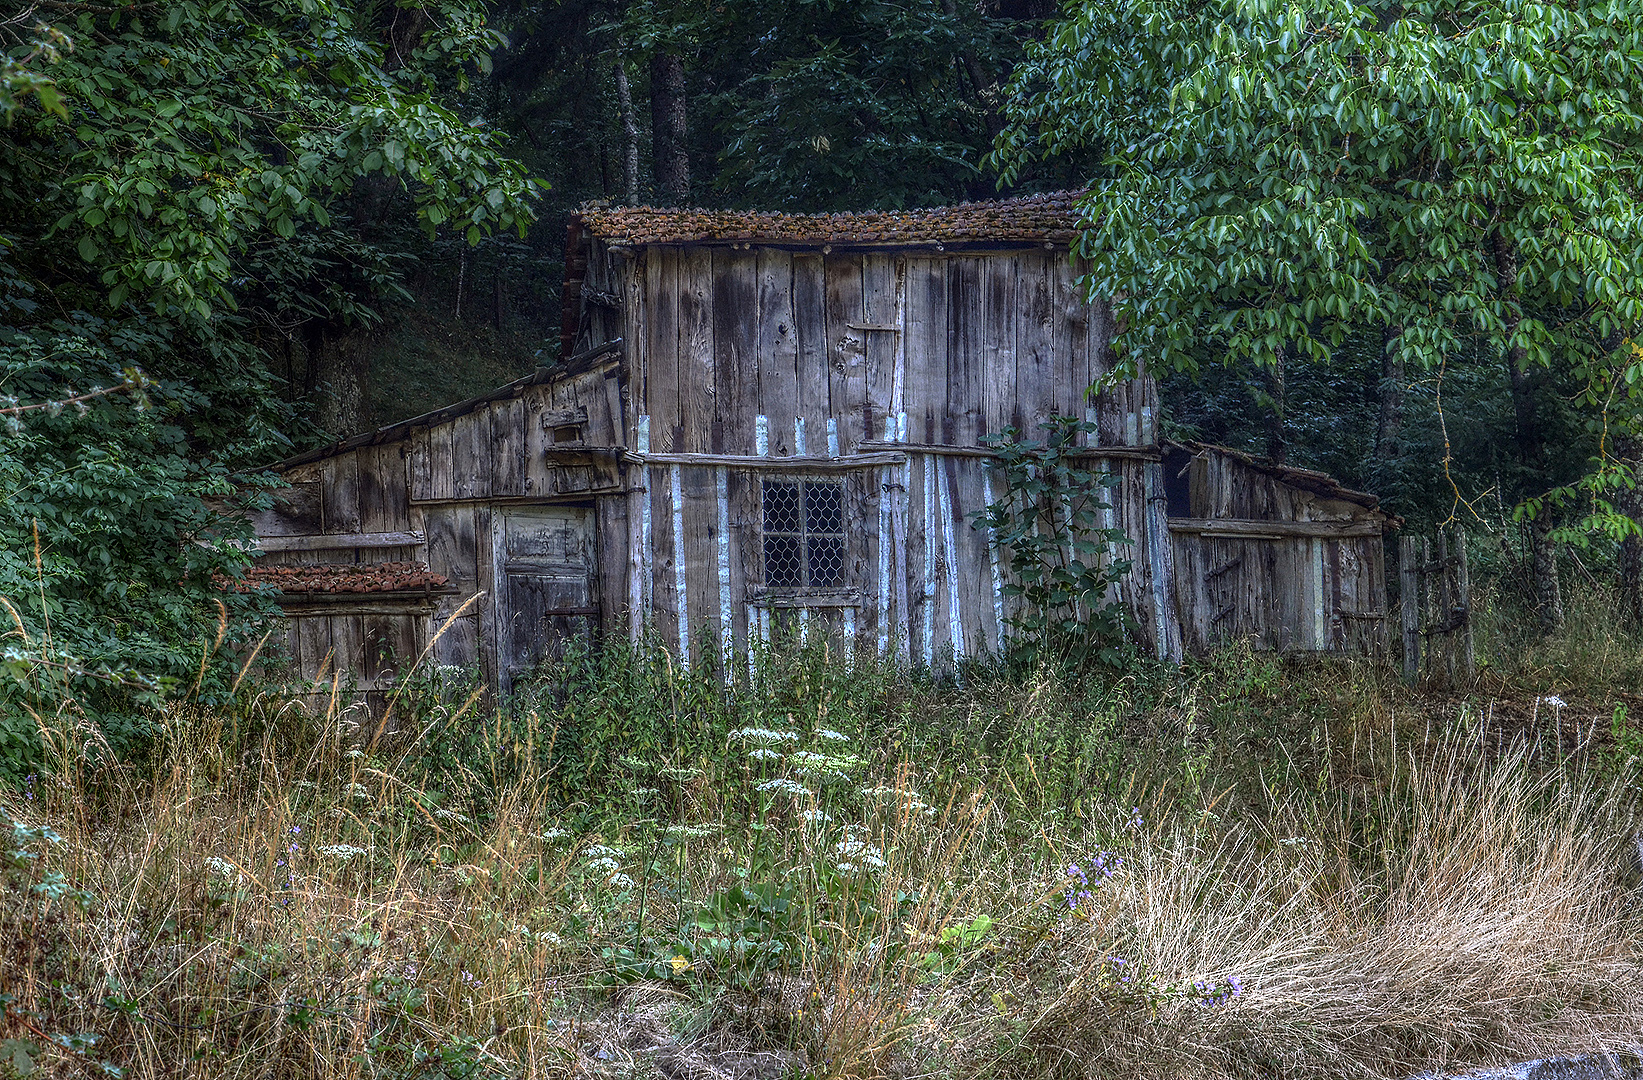 Oude schuur, Toscane, Italië, Old shed, Garfagnana, Tuscany, Italy